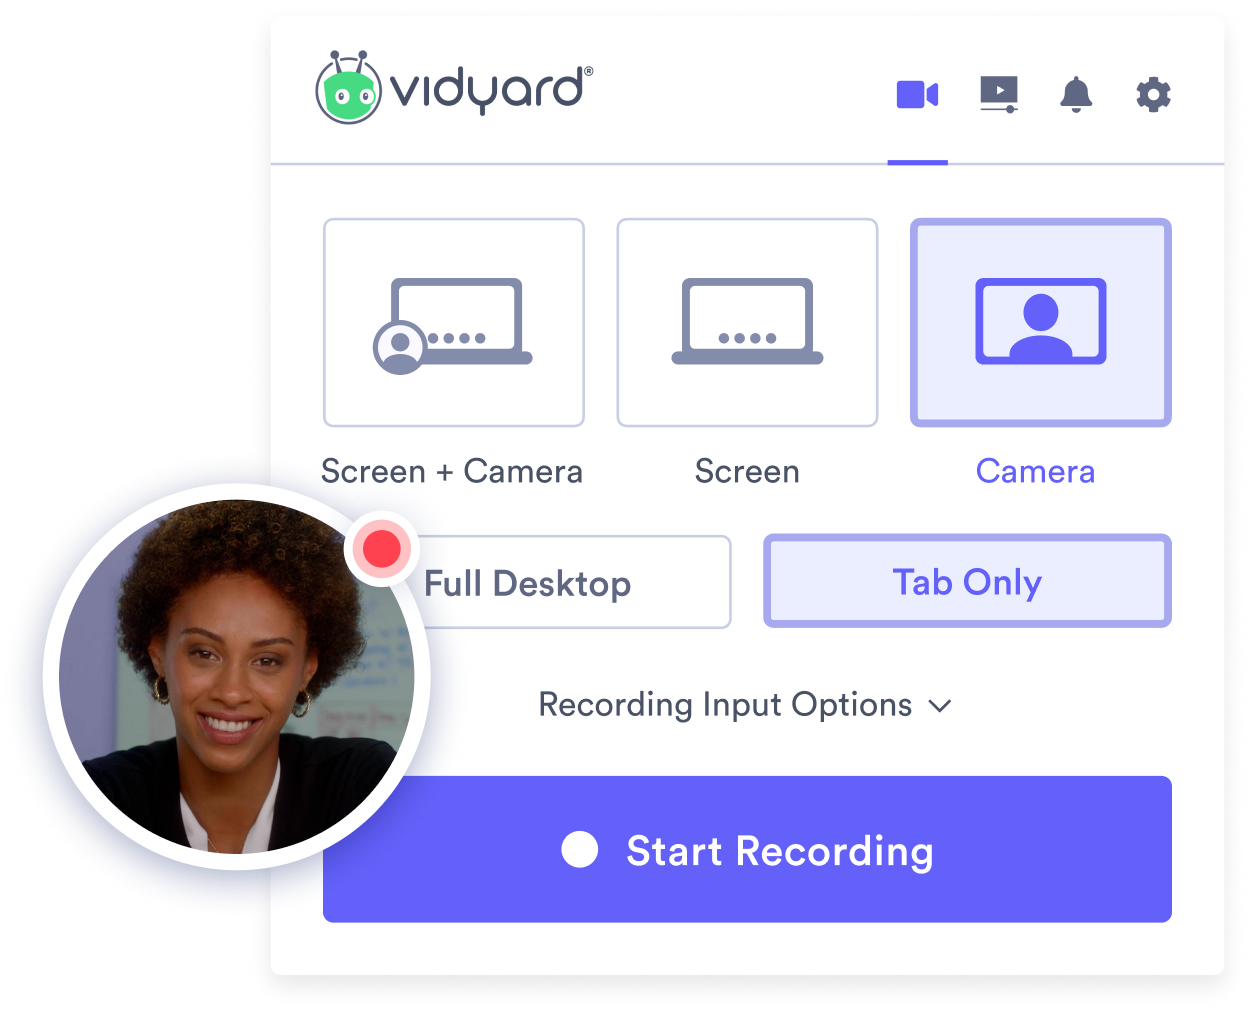 Using Vidyard’s easy-to-use recording tool to create videos for virtual selling.